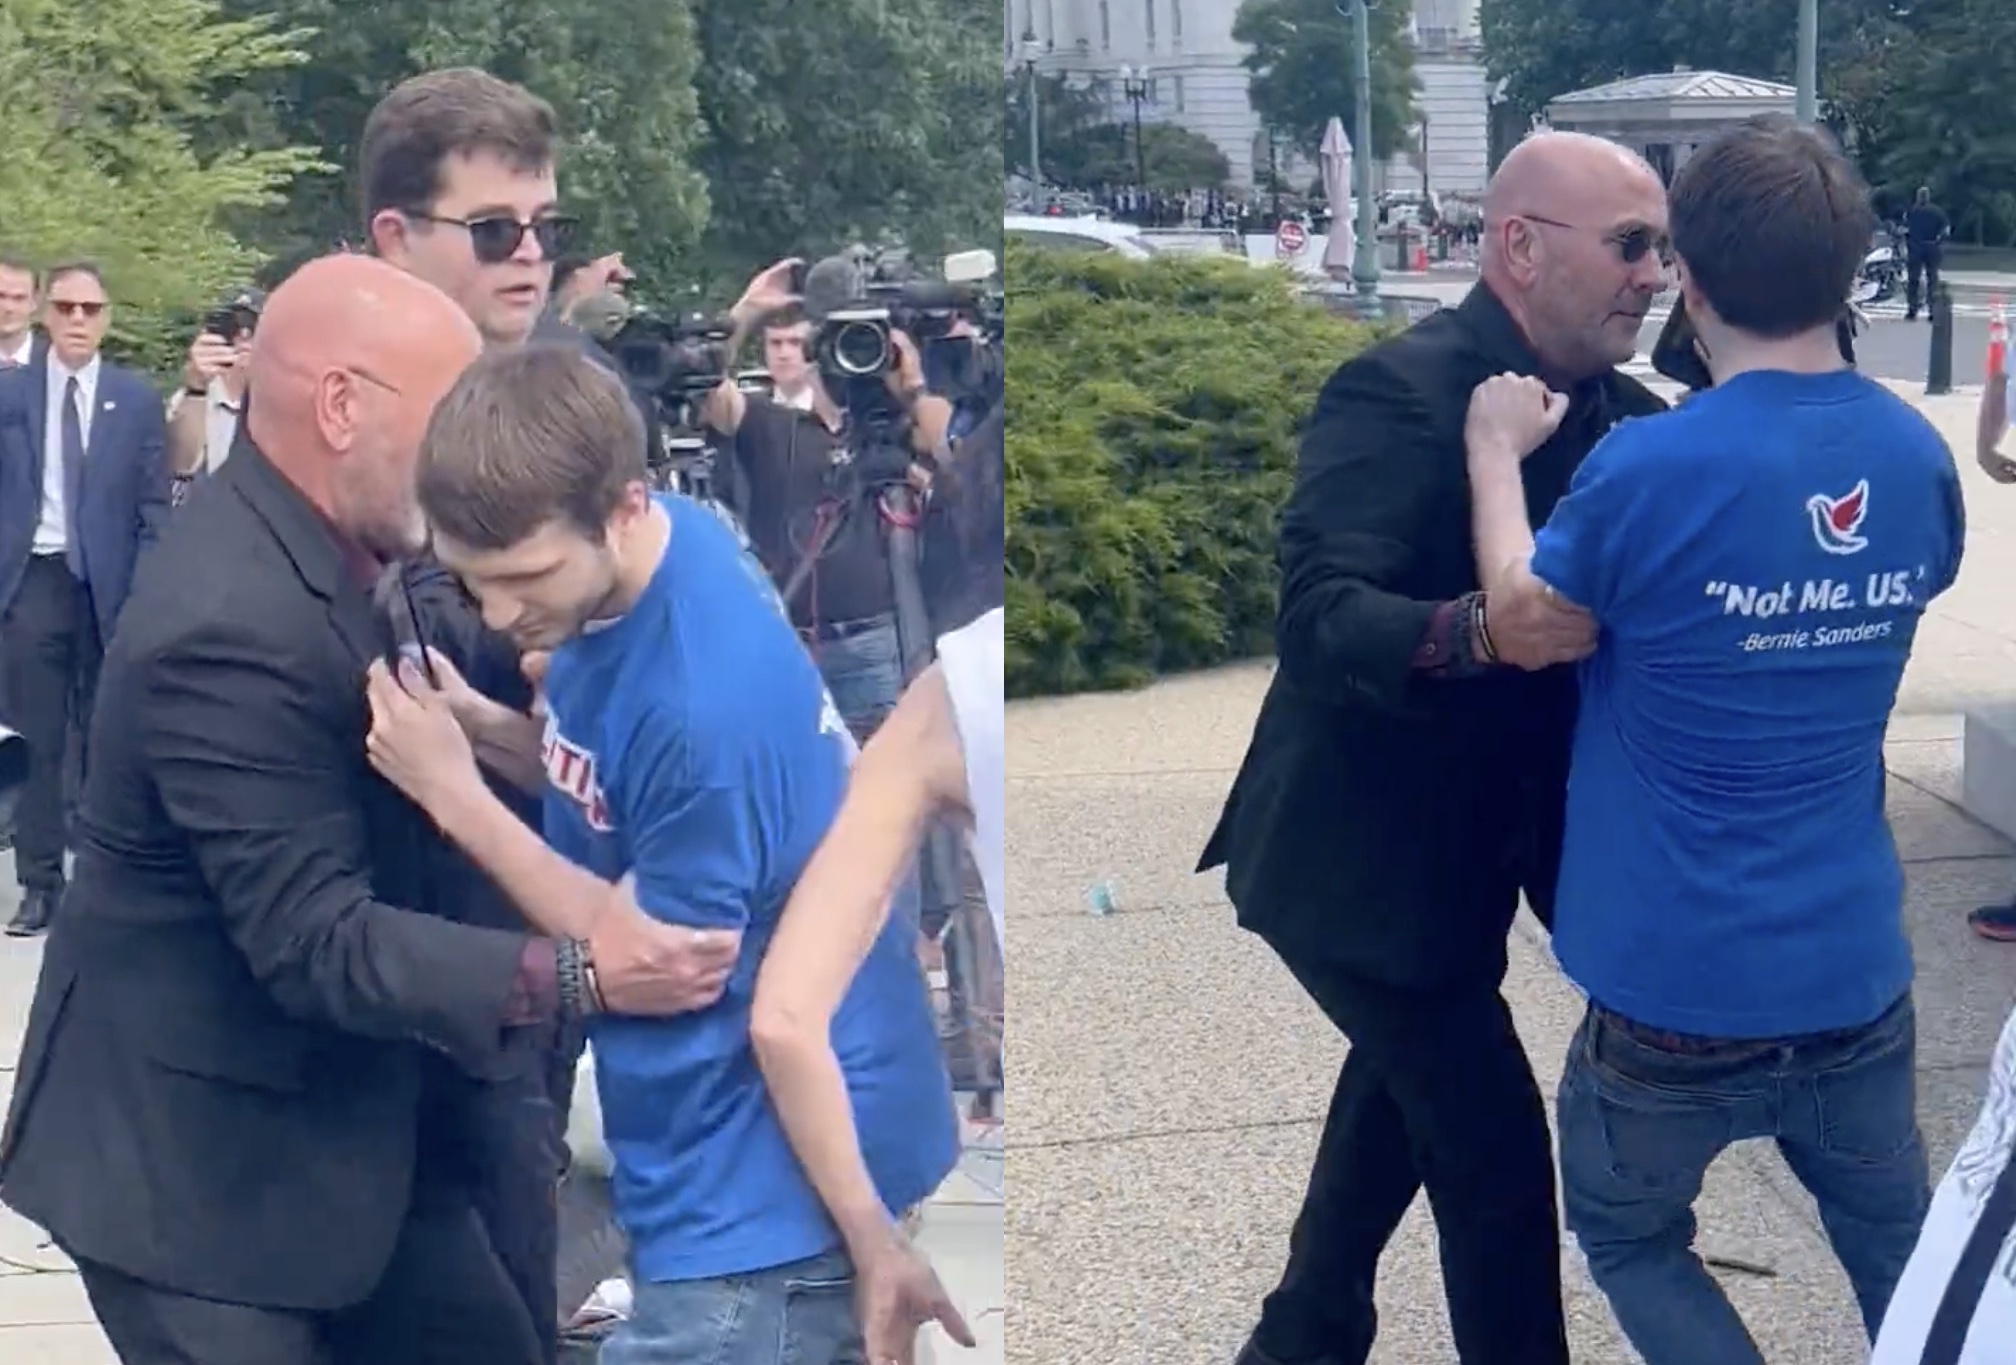 House Republican Manhandles Protester, Who Tells Him ‘Get Off Me! You’re Hurting Me!’